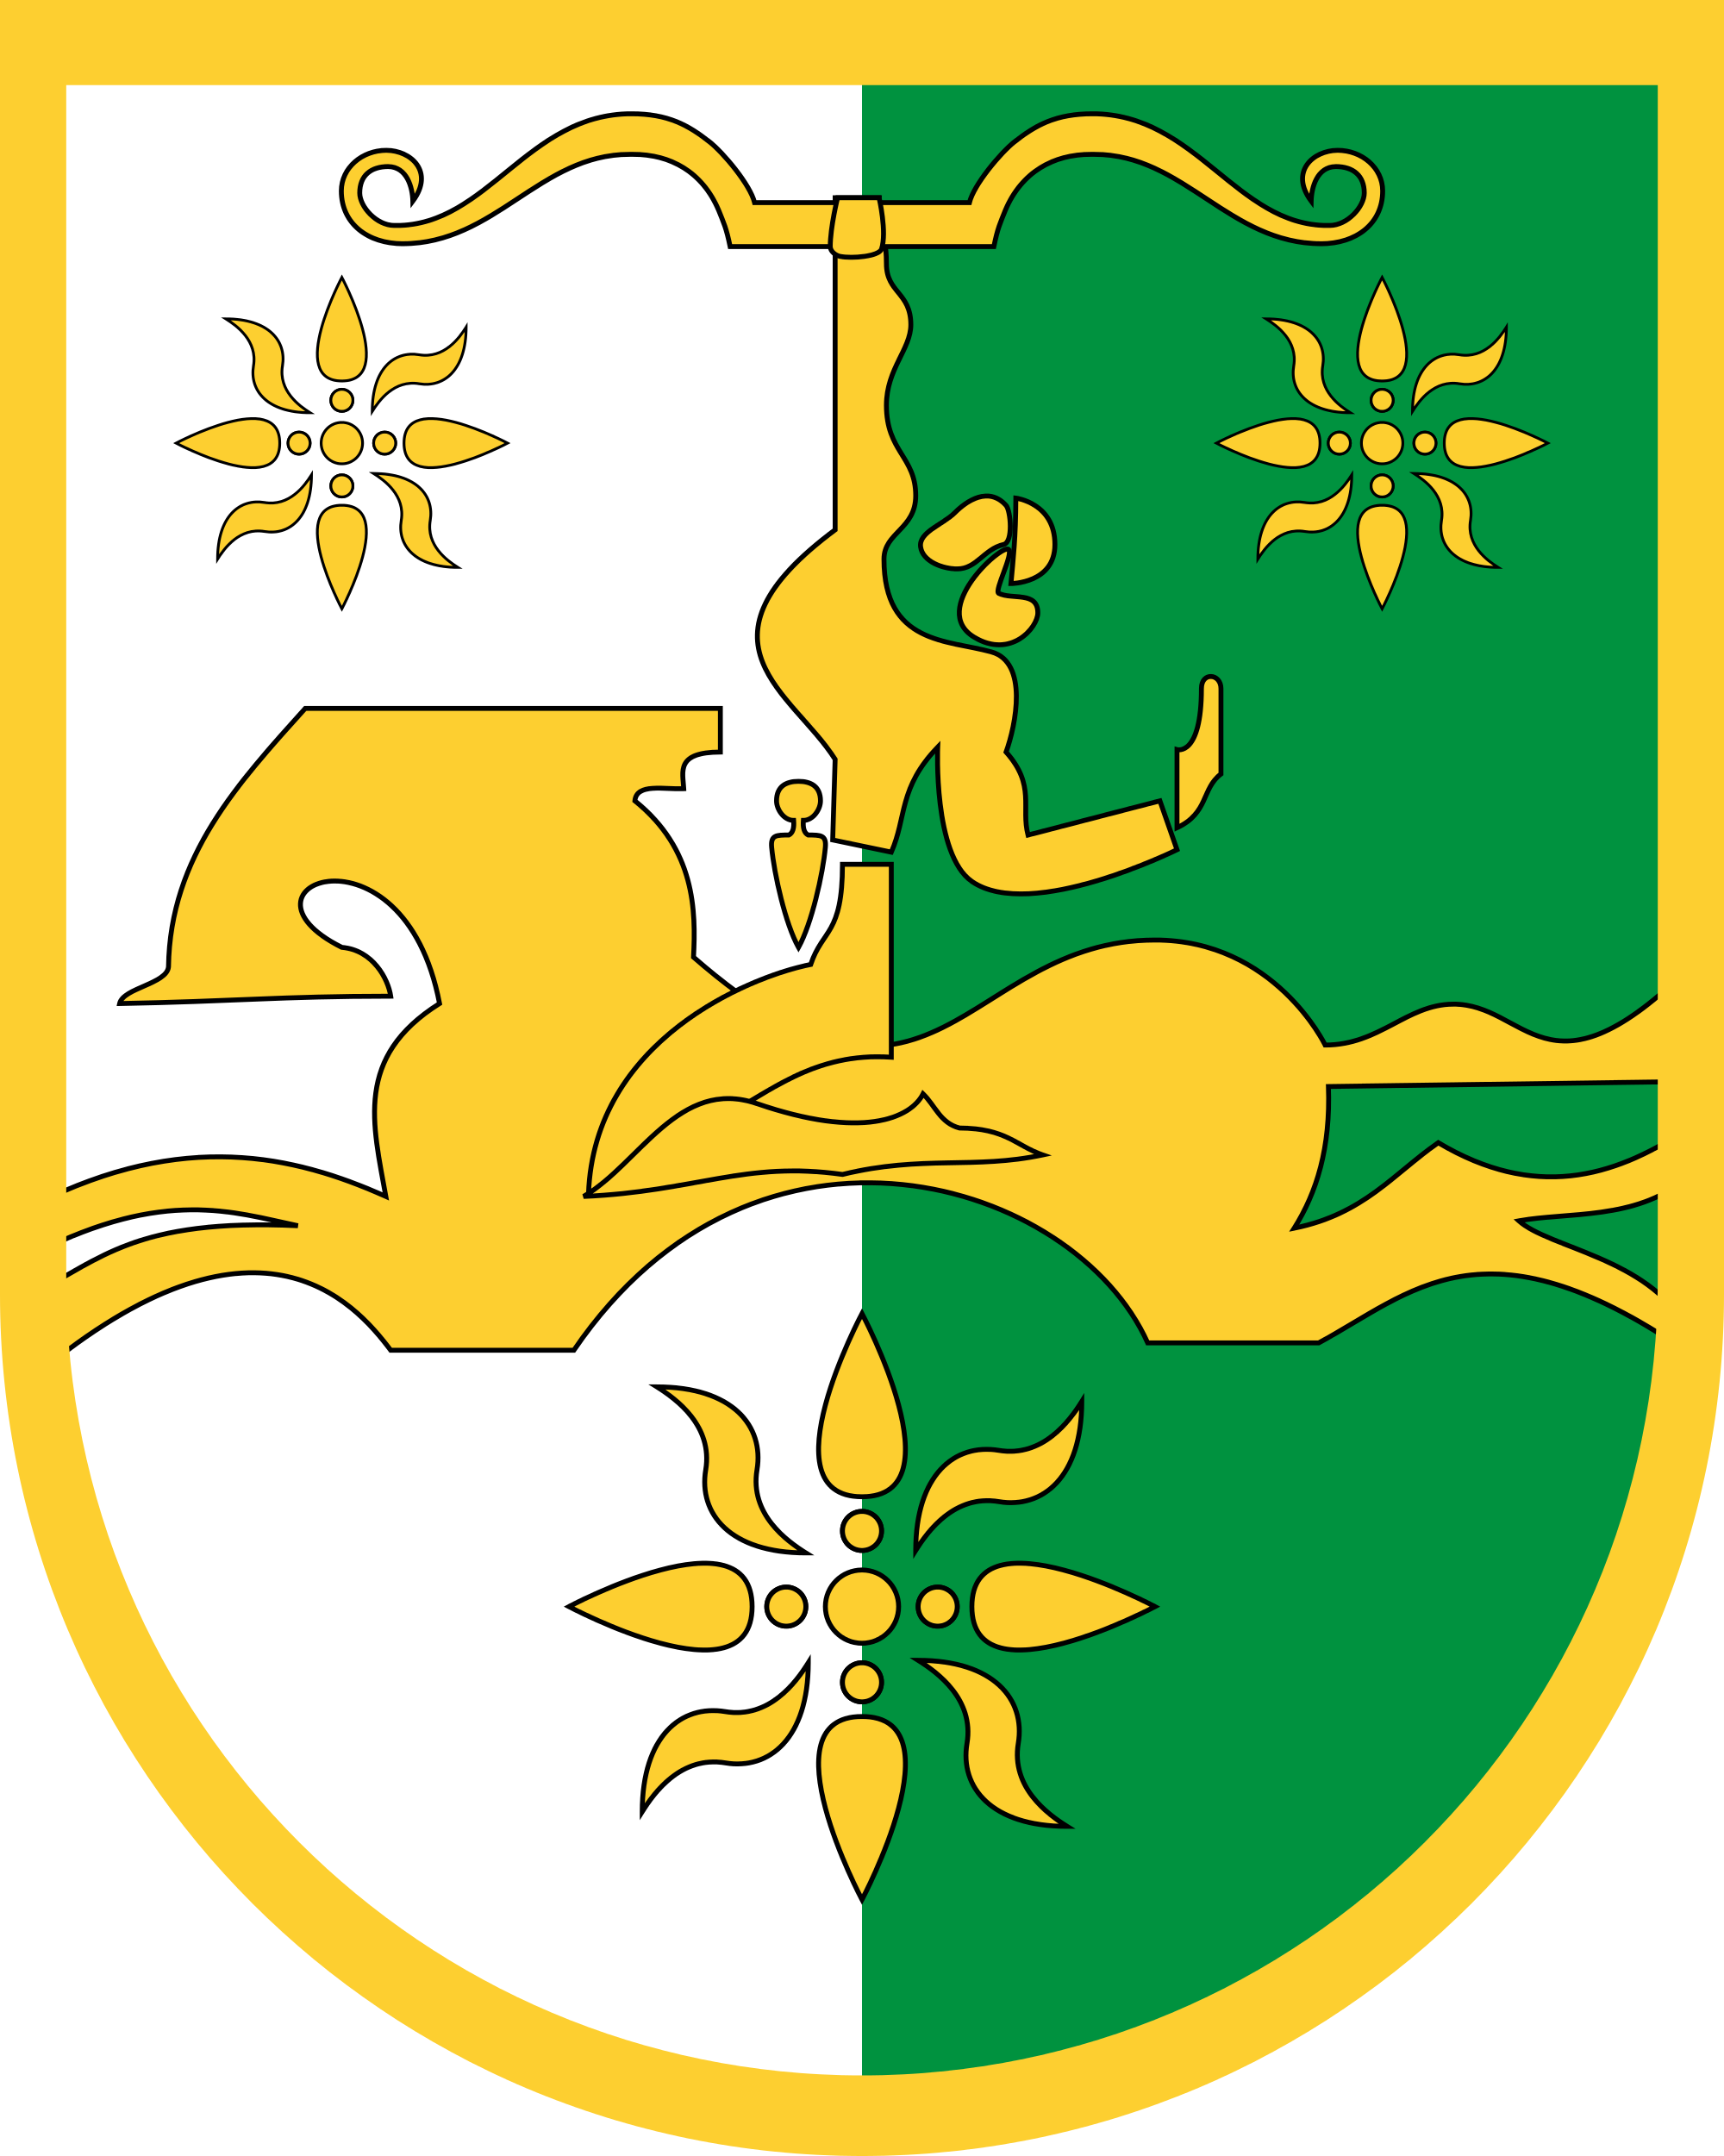 Coat of arms of Abkhazia